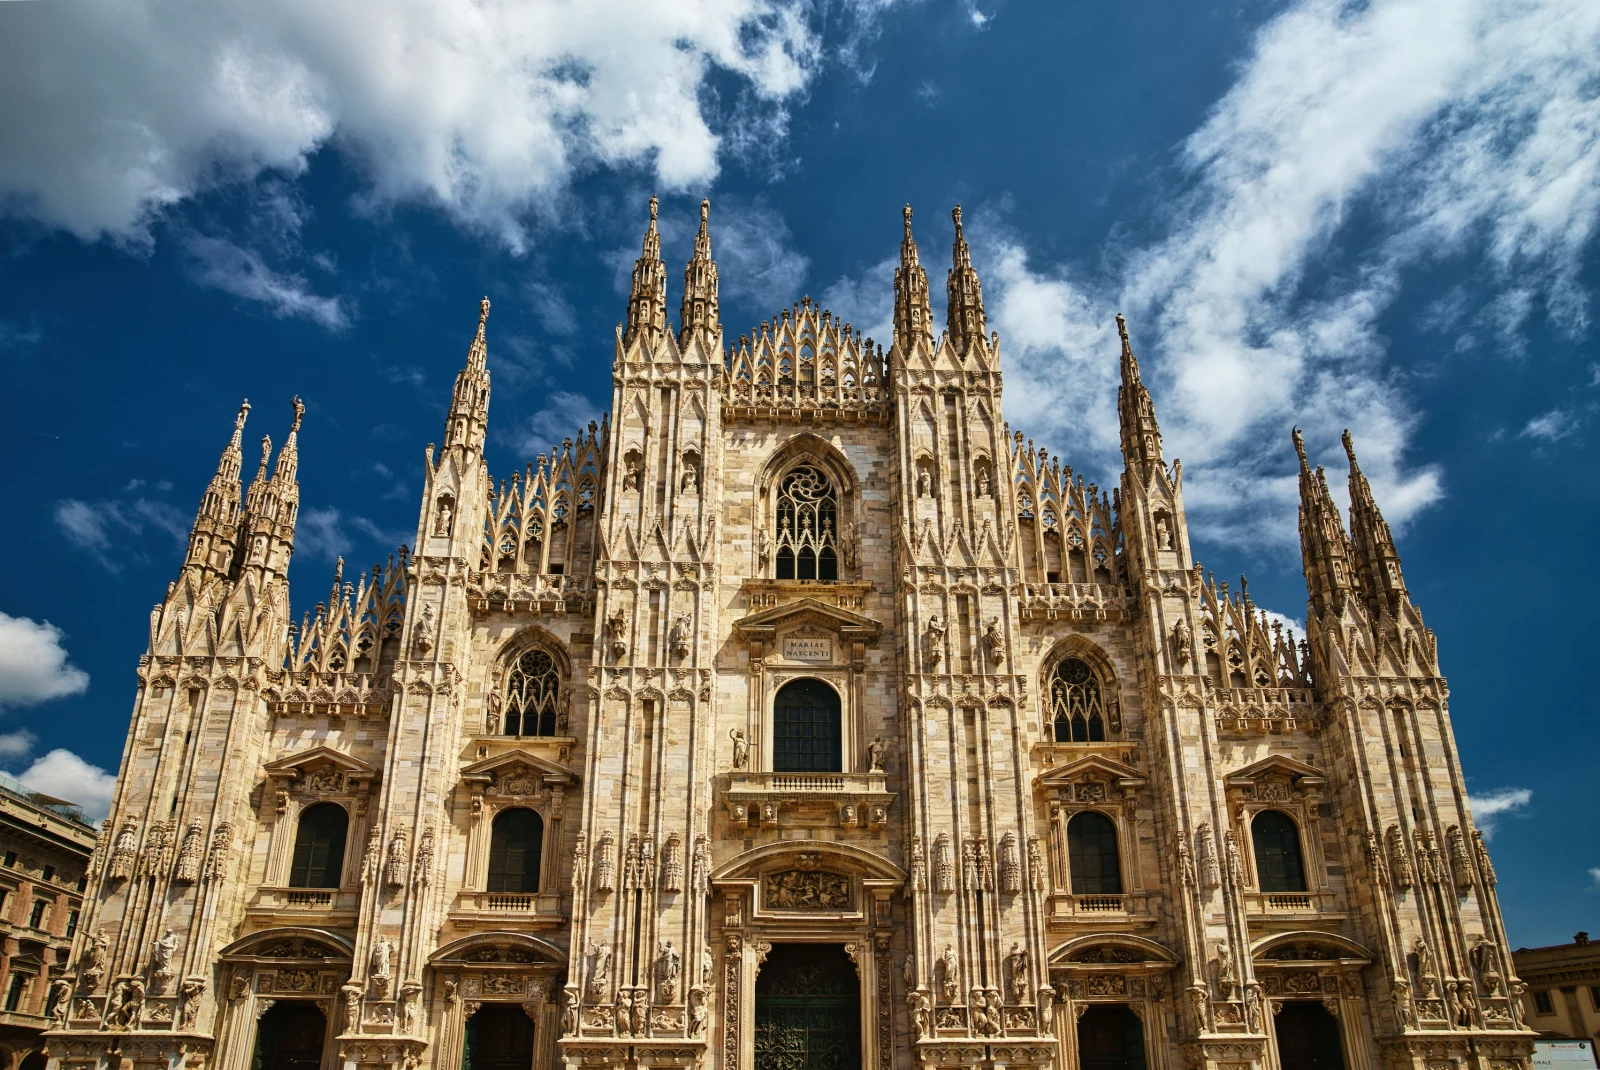 The Duomo di Milano is considered the second largest Roman Catholic cathedral in the world.